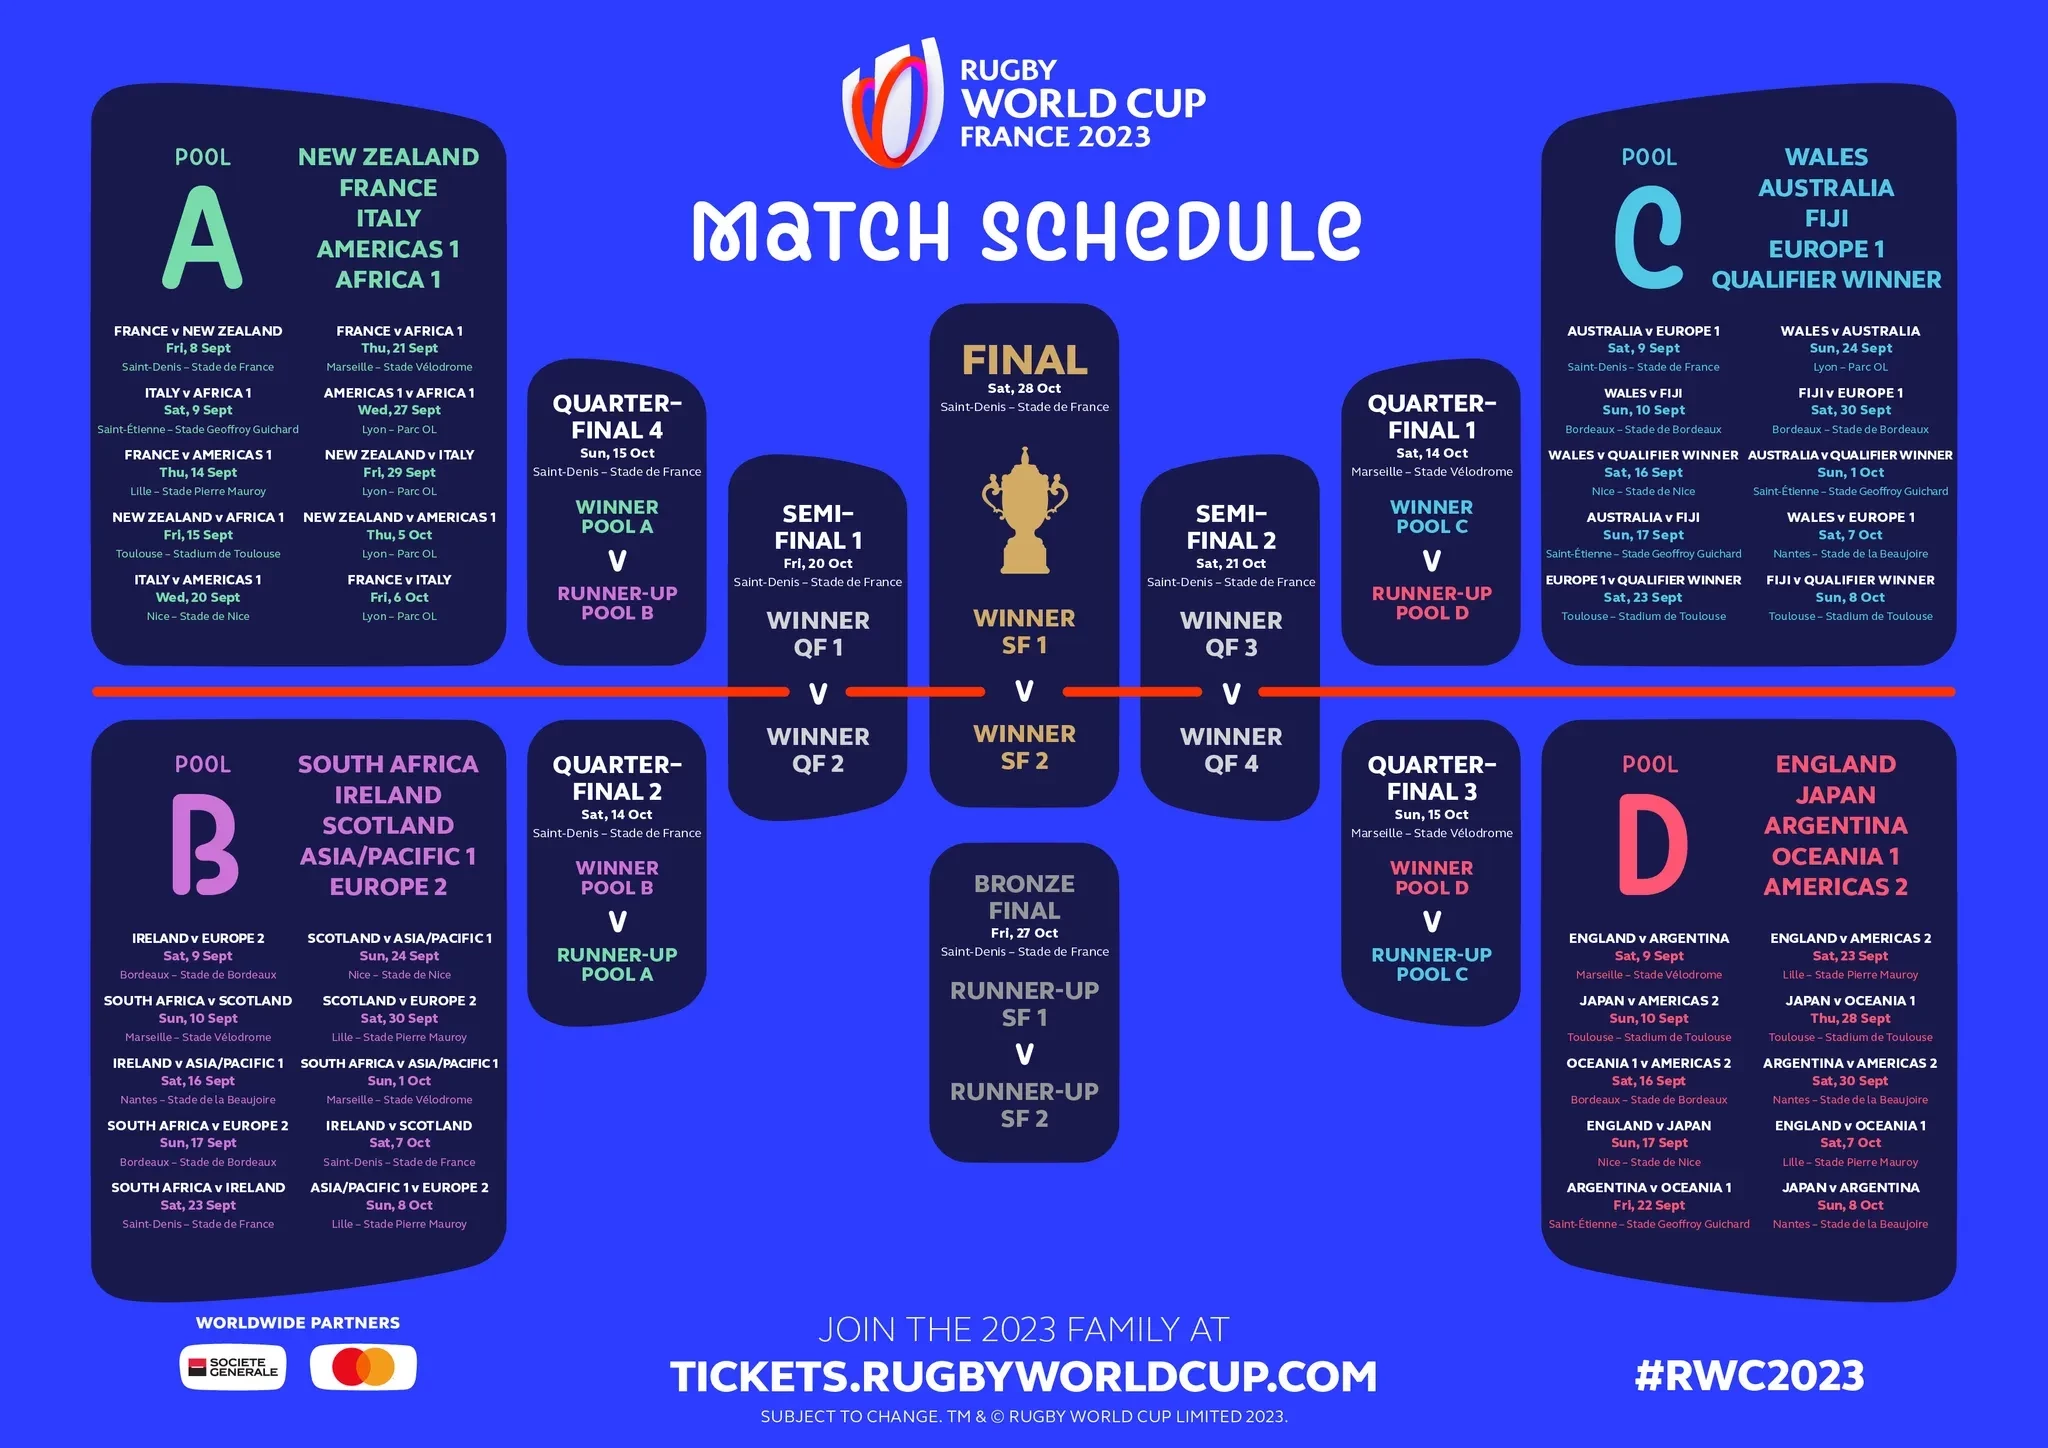 Focus on 2023 Women's World Cup with First Qualifying Draw